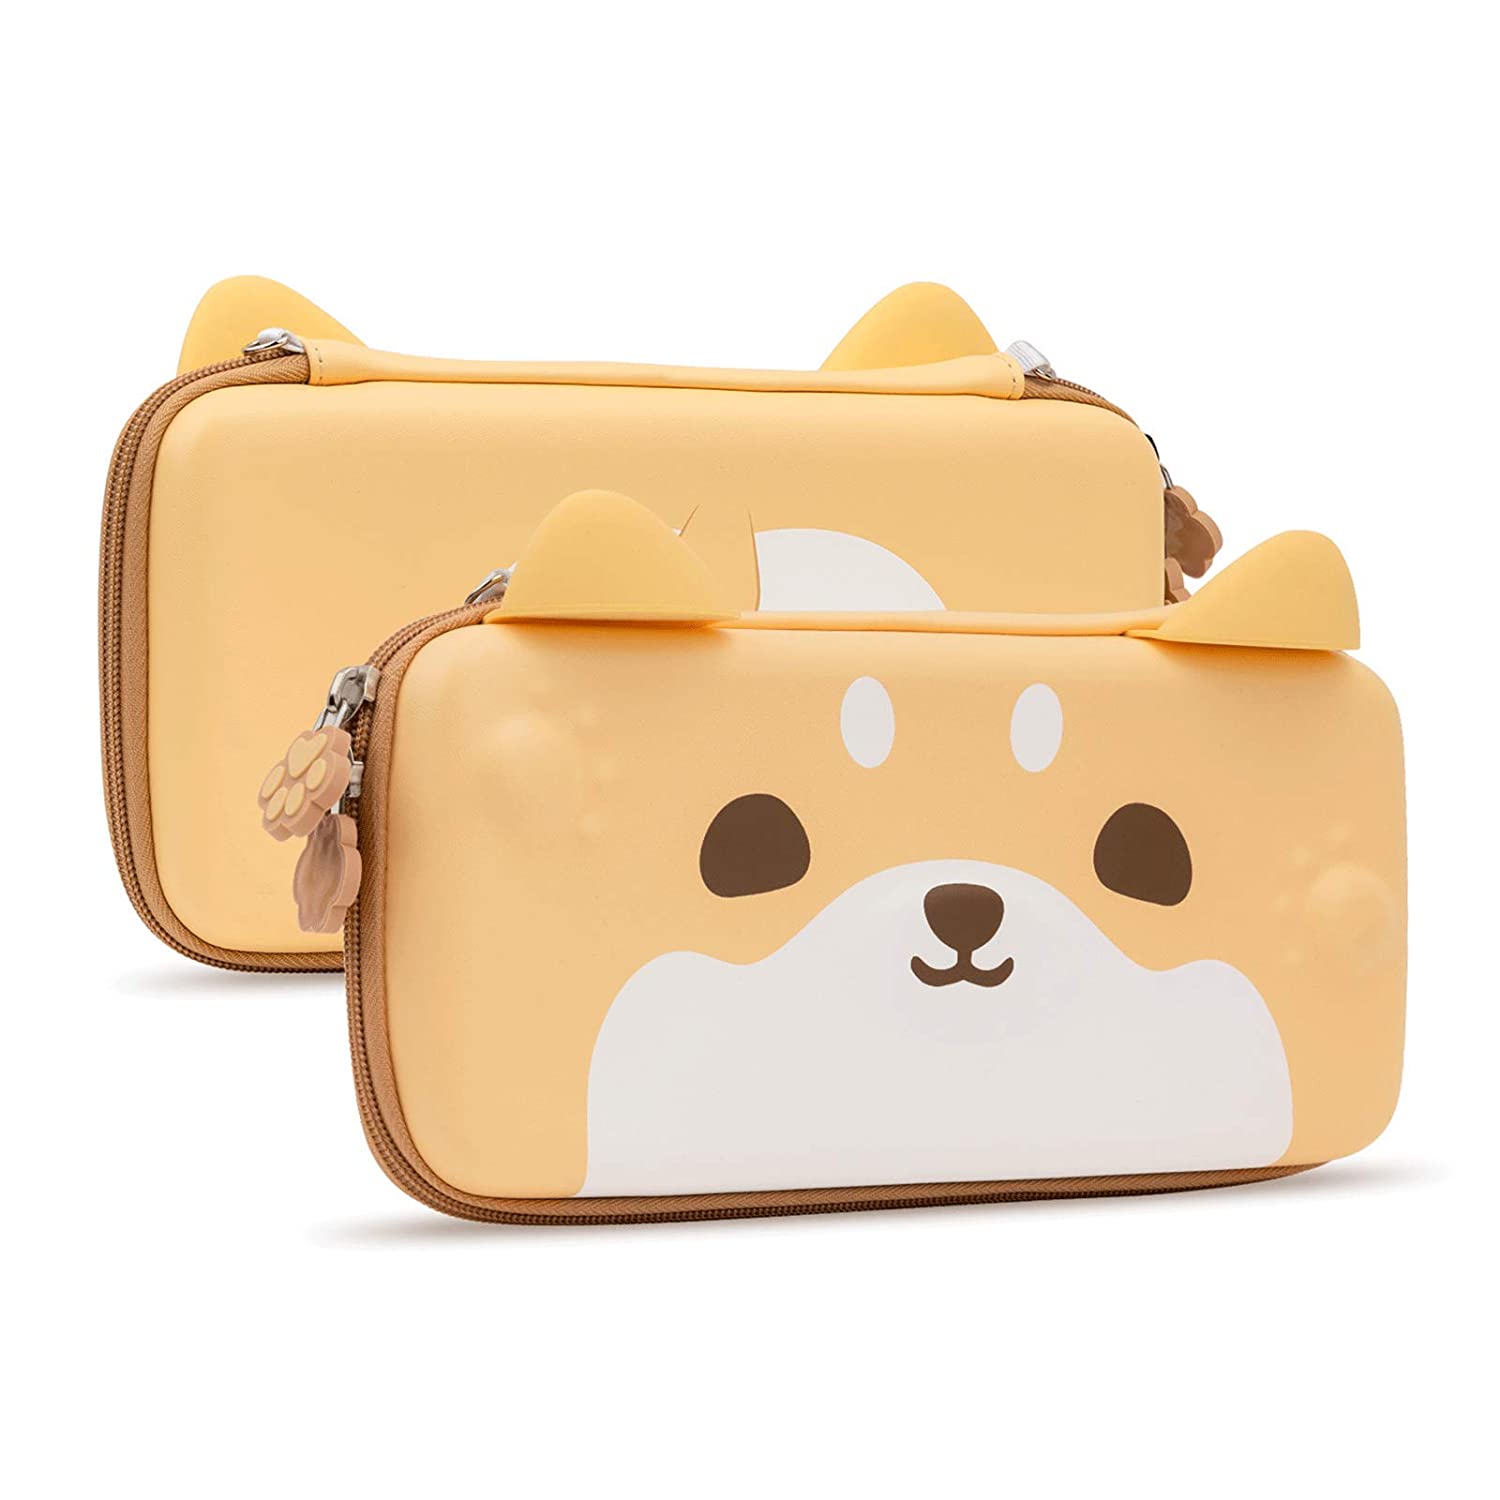 Geekshare Cute Dog Ear Carry Case Compatible with Nintendo Switch - Portable Hardshell Slim Travel Carrying Case fit Switch Console and Accessories-A Removable Wrist Strap